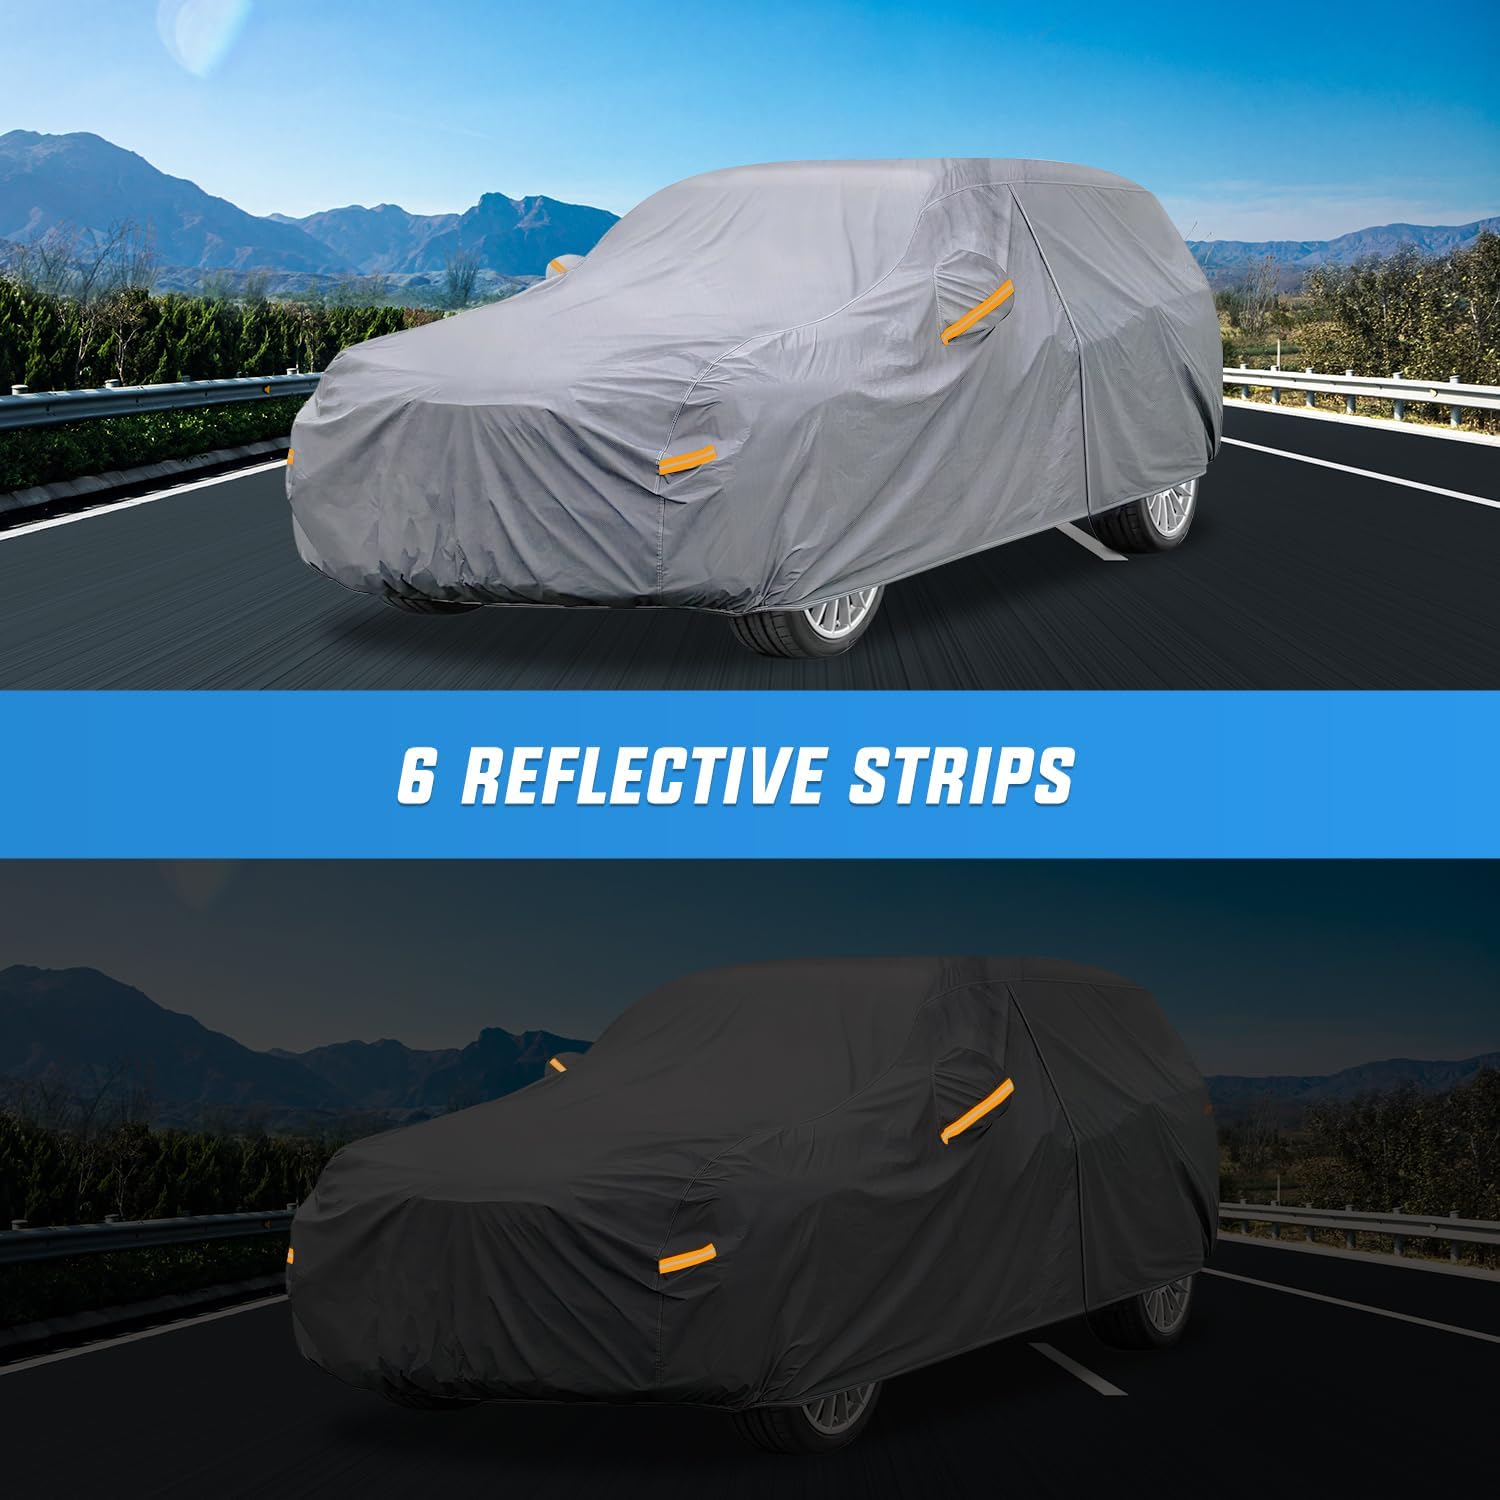 Universal Fit for SUV Jeep-Length (Up to 181") Car Cover UV Protection Nilight